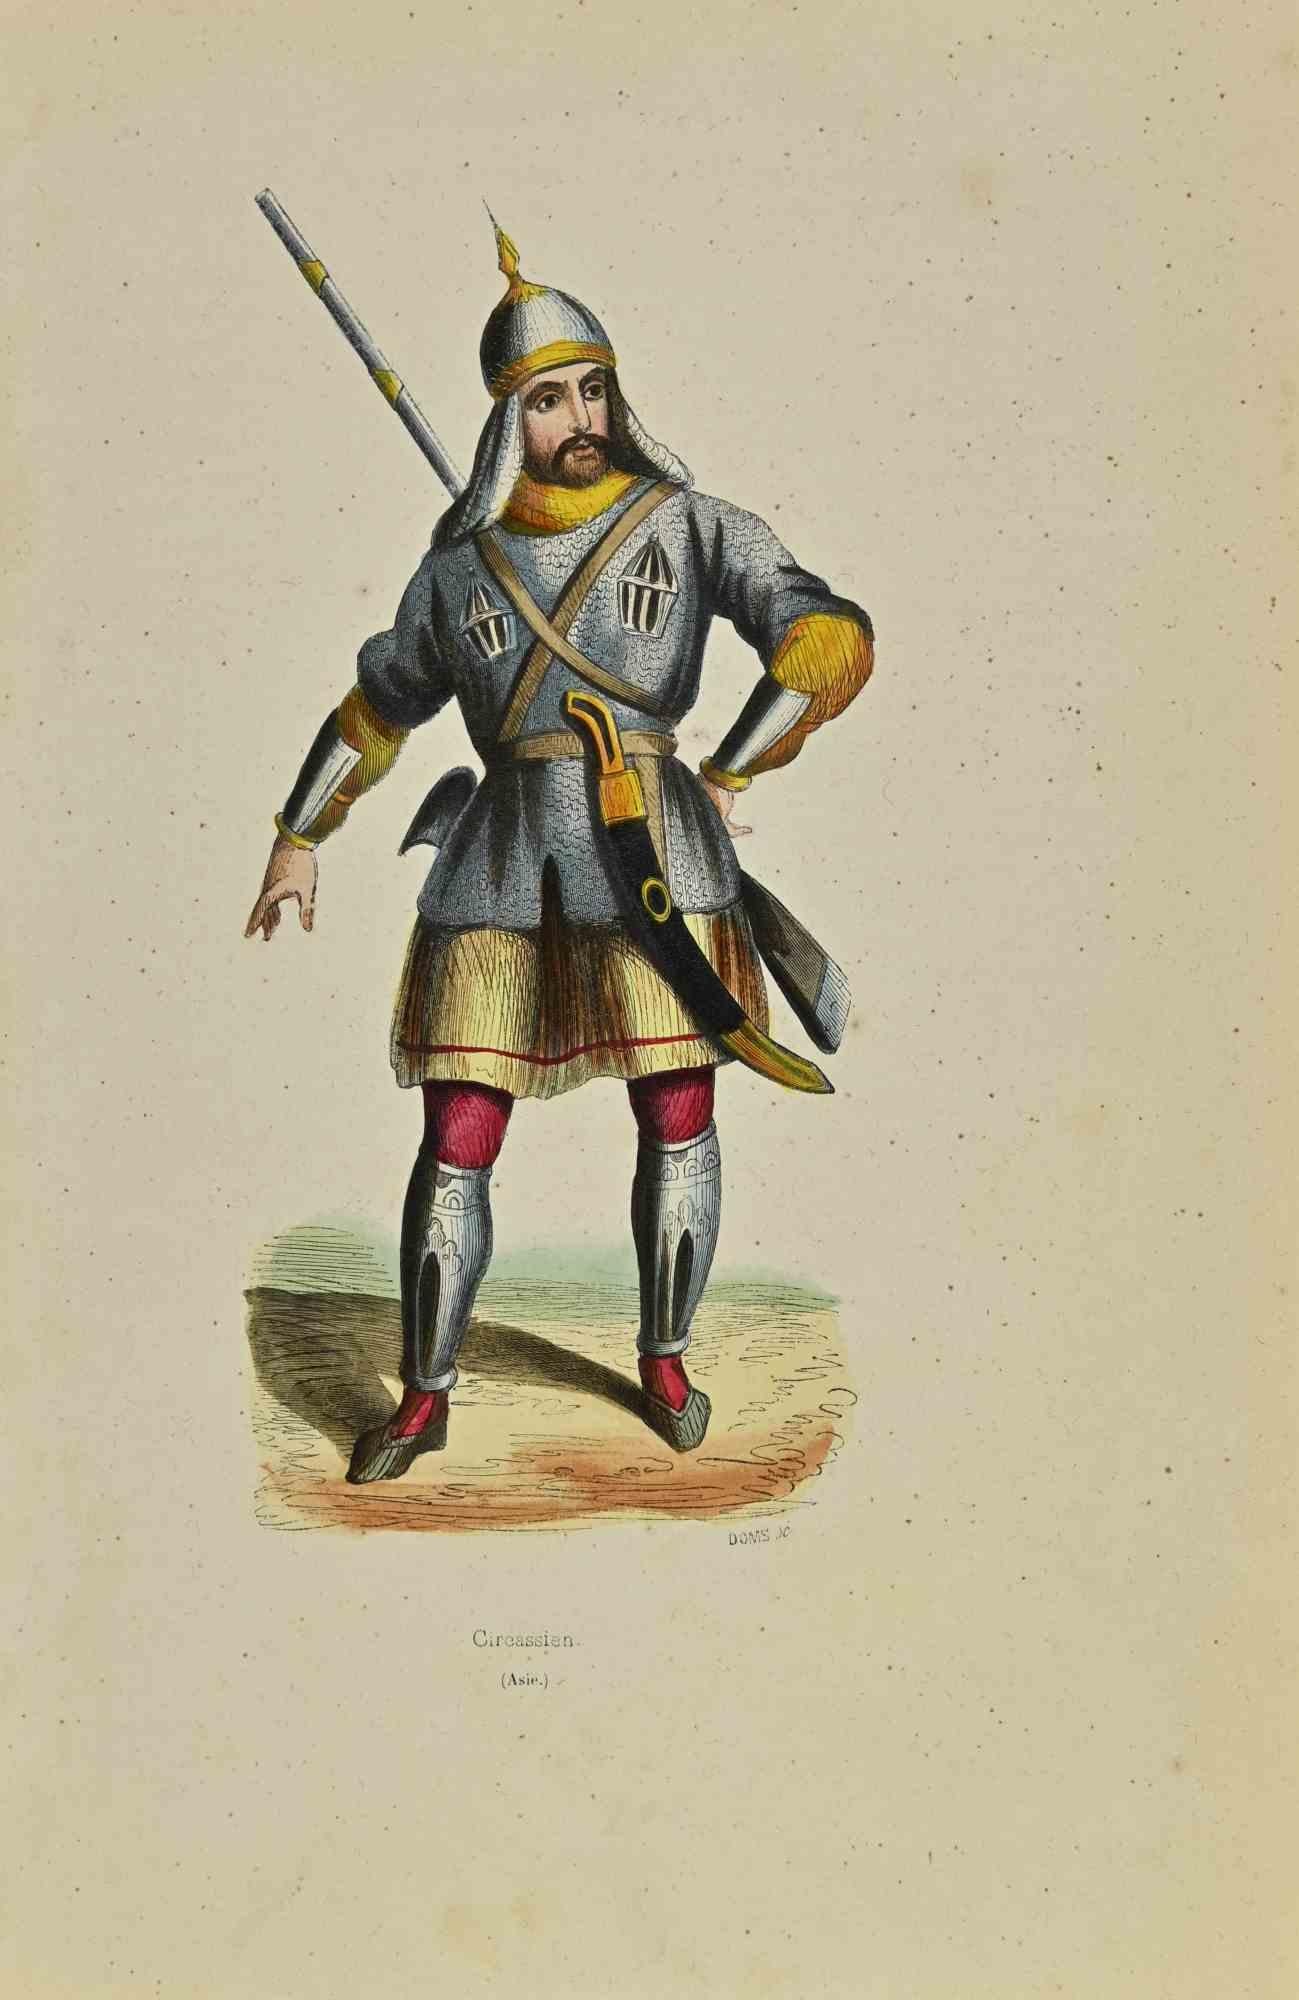 Circassian is a lithograph made by Auguste Wahlen in 1844.

Hand colored.

Good condition.

At the center of the artwork is the original title "Circassien".

The work is part of Suite Moeurs, usages et costumes de tous les peuples du monde, d'après